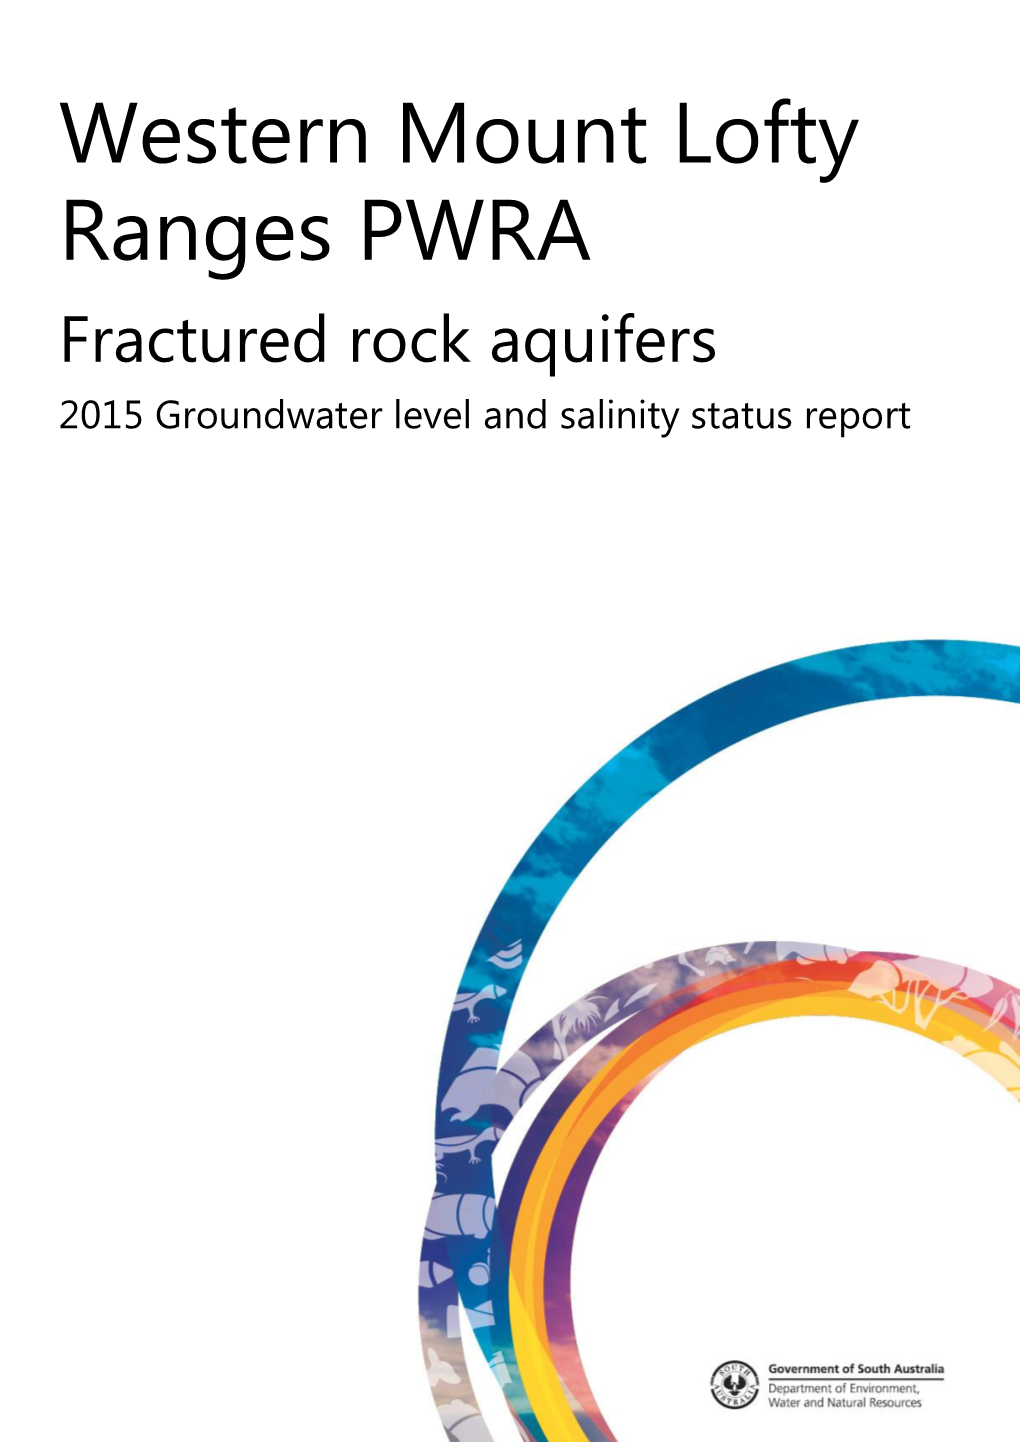 Western Mount Lofty Ranges PWRA Fractured Rock Aquifers 2015 Groundwater Level and Salinity Status Report